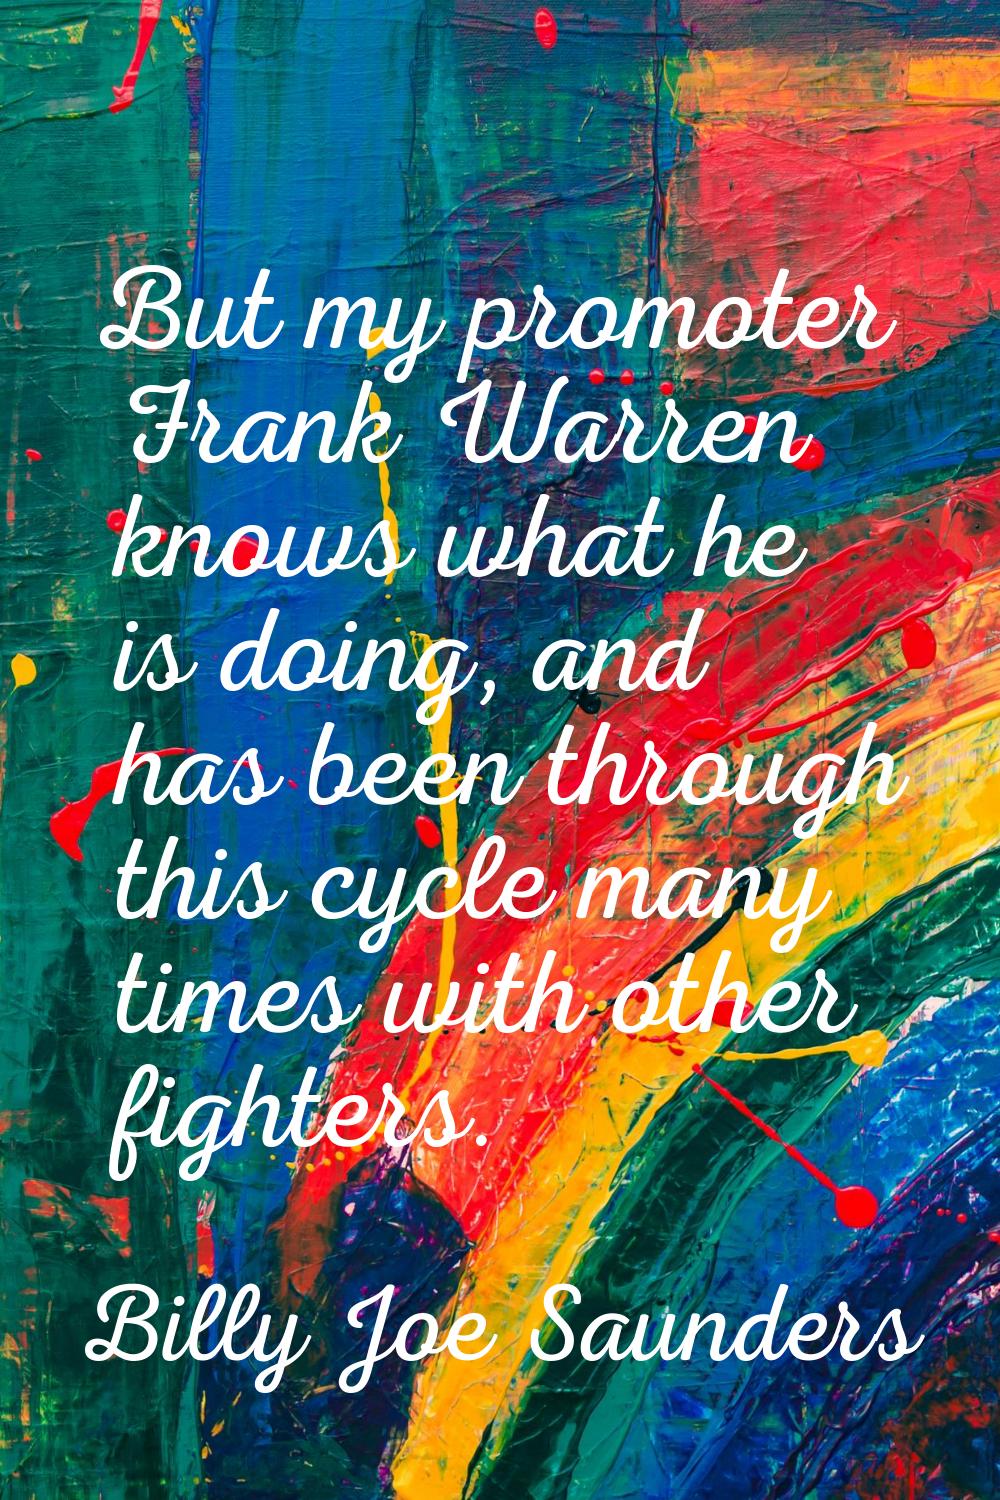 But my promoter Frank Warren knows what he is doing, and has been through this cycle many times wit